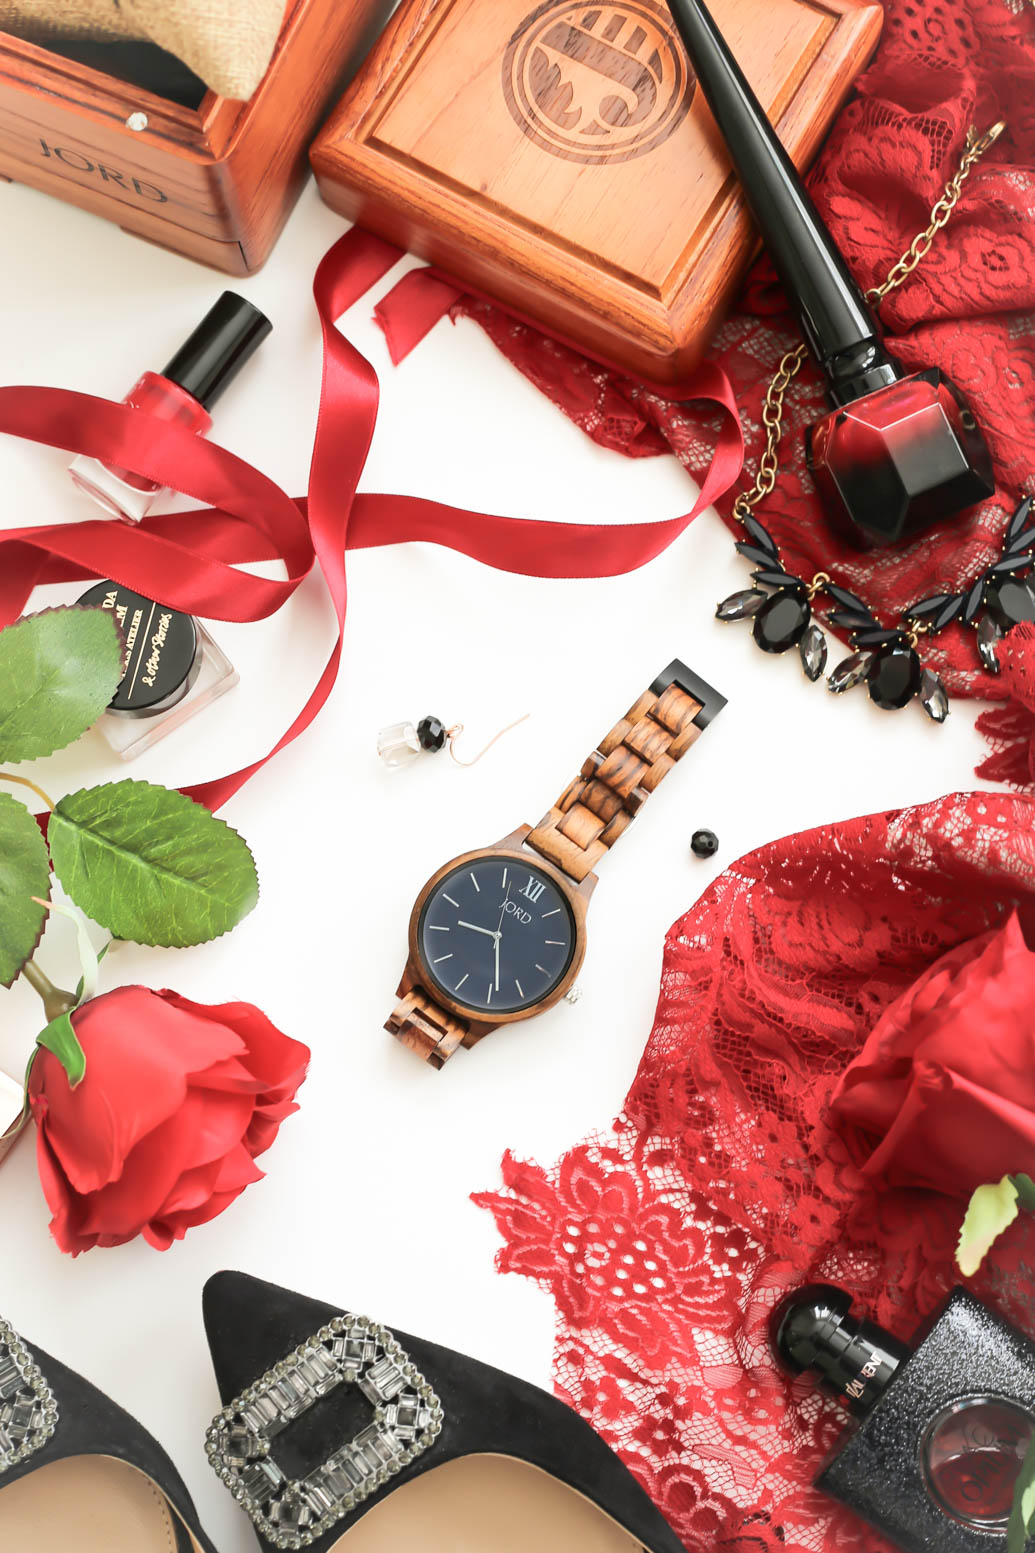 JORD Frankie Series Zebrawood & Navy Wooden Watch styled with red lace scarf, black shoes and beauty items 